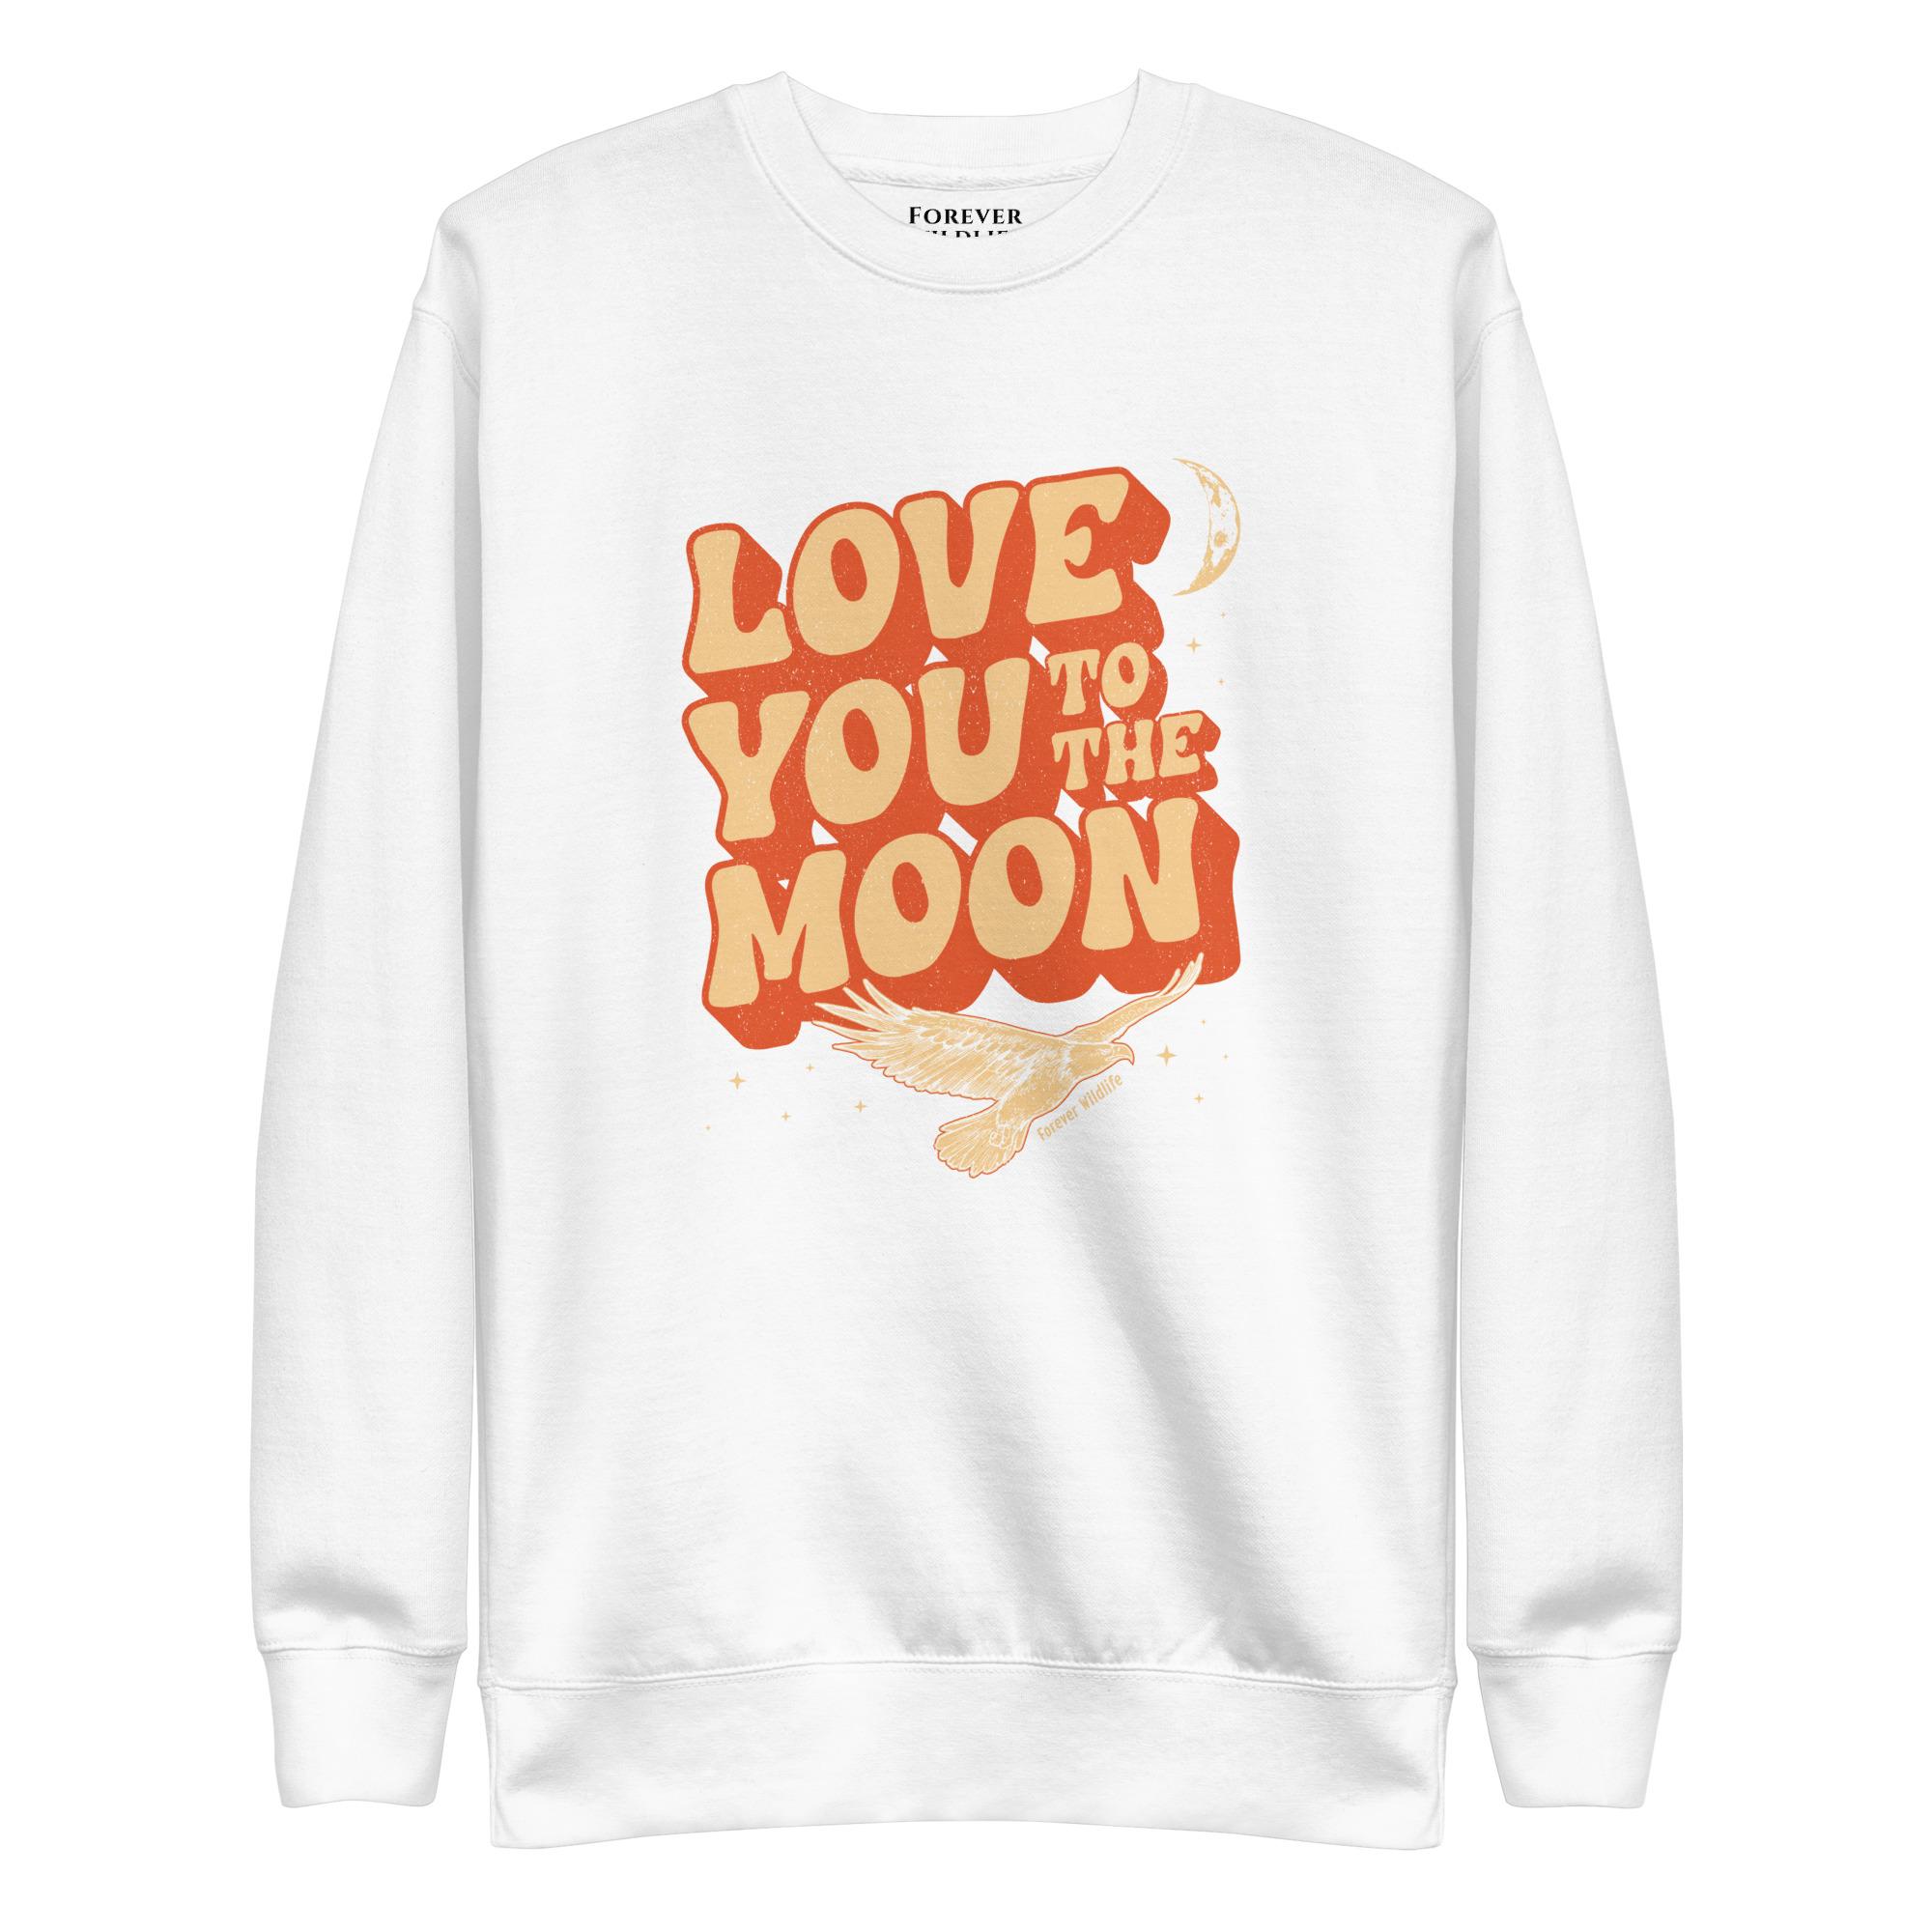 Eagle Sweatshirt in White-Premium Wildlife Animal Inspiration Sweatshirt Design with 'Love You To The Moon' text, part of Wildlife Sweatshirts & Clothing from Forever Wildlife.